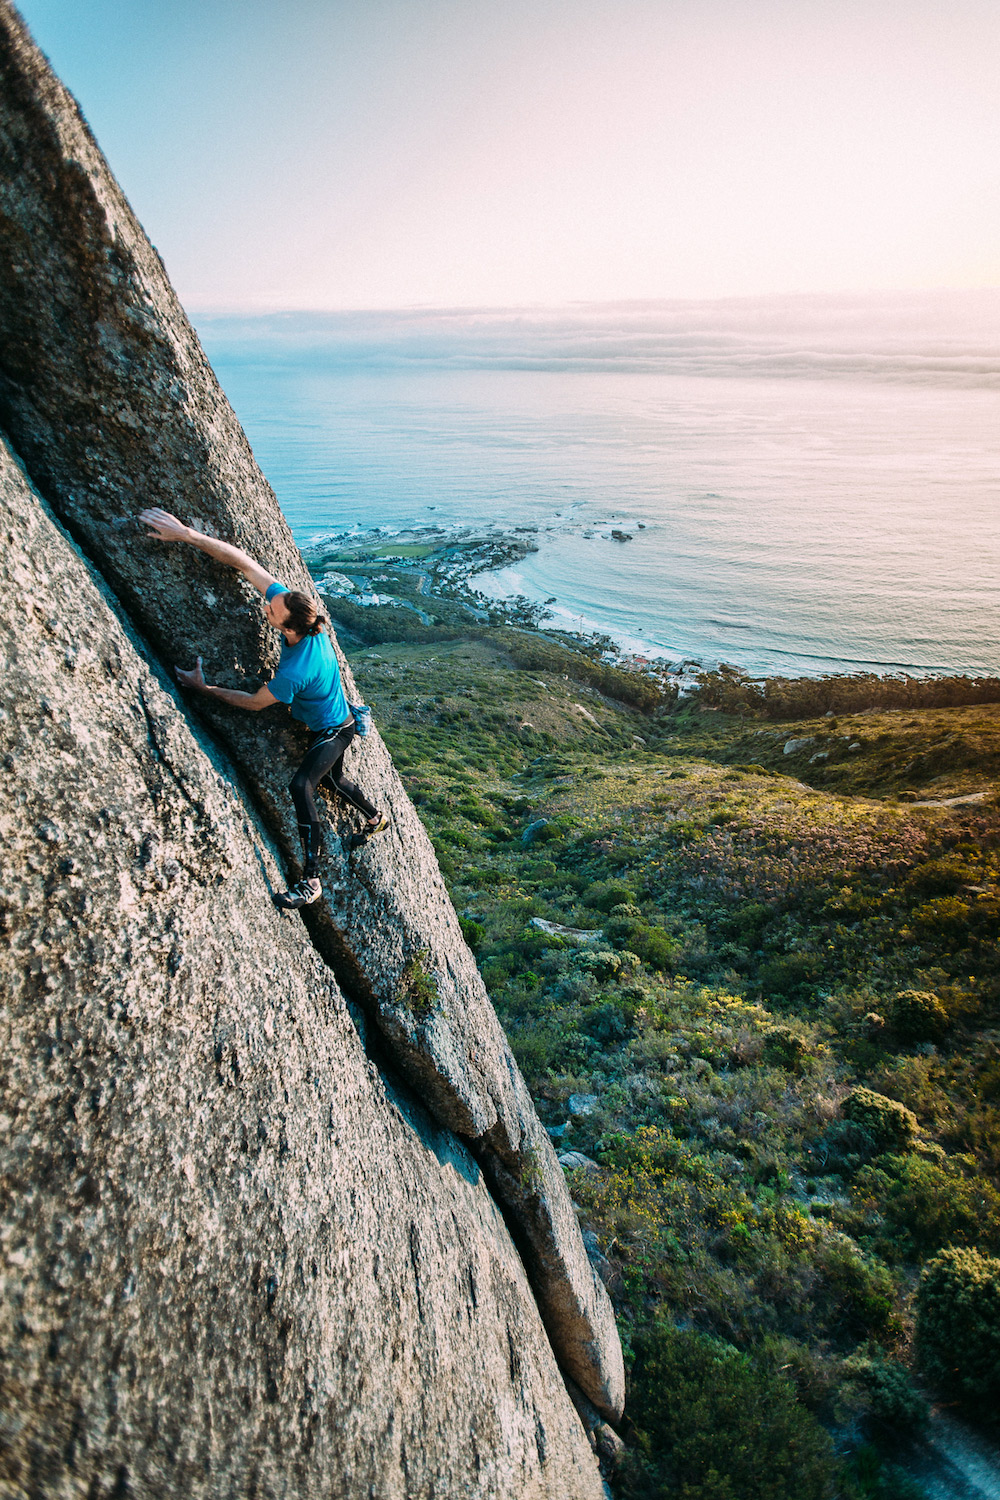 Lion Heart (5.11b/6c). Reaching the top on the first free solo ascent of Lion Heart. Lion’s Head. Cape Town. Photo: Micky Wieswedel.